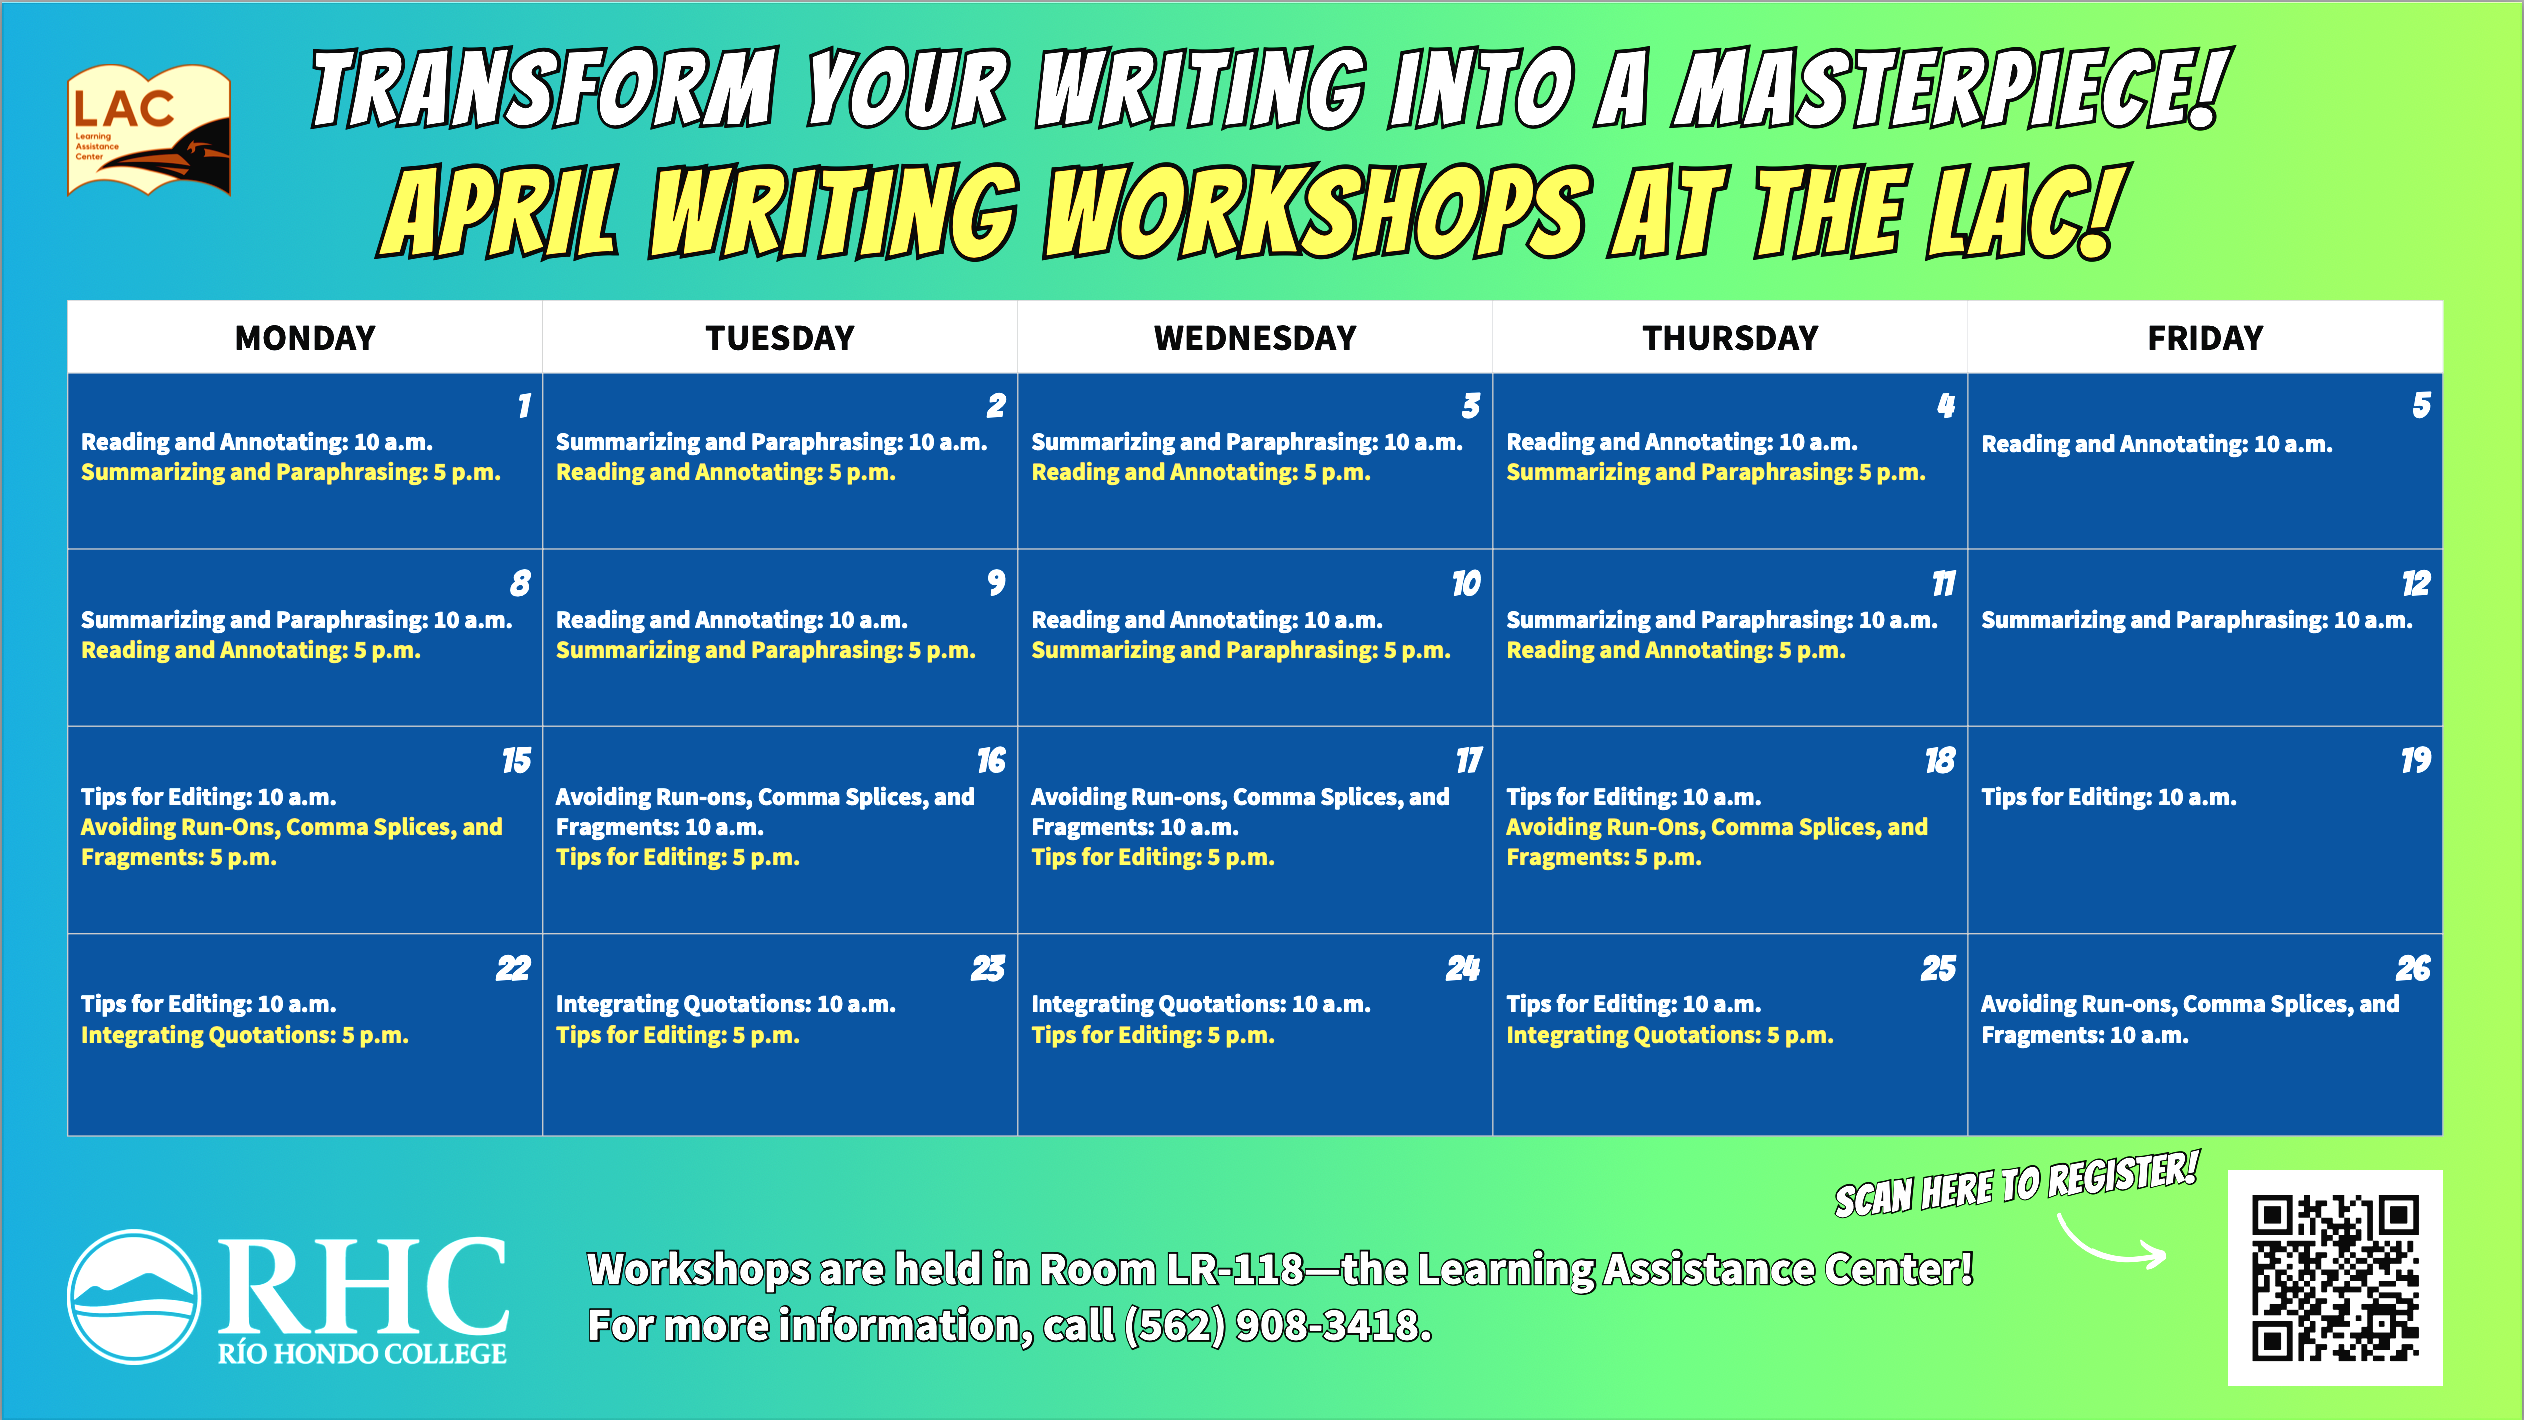 April Writing workshops at the LAC